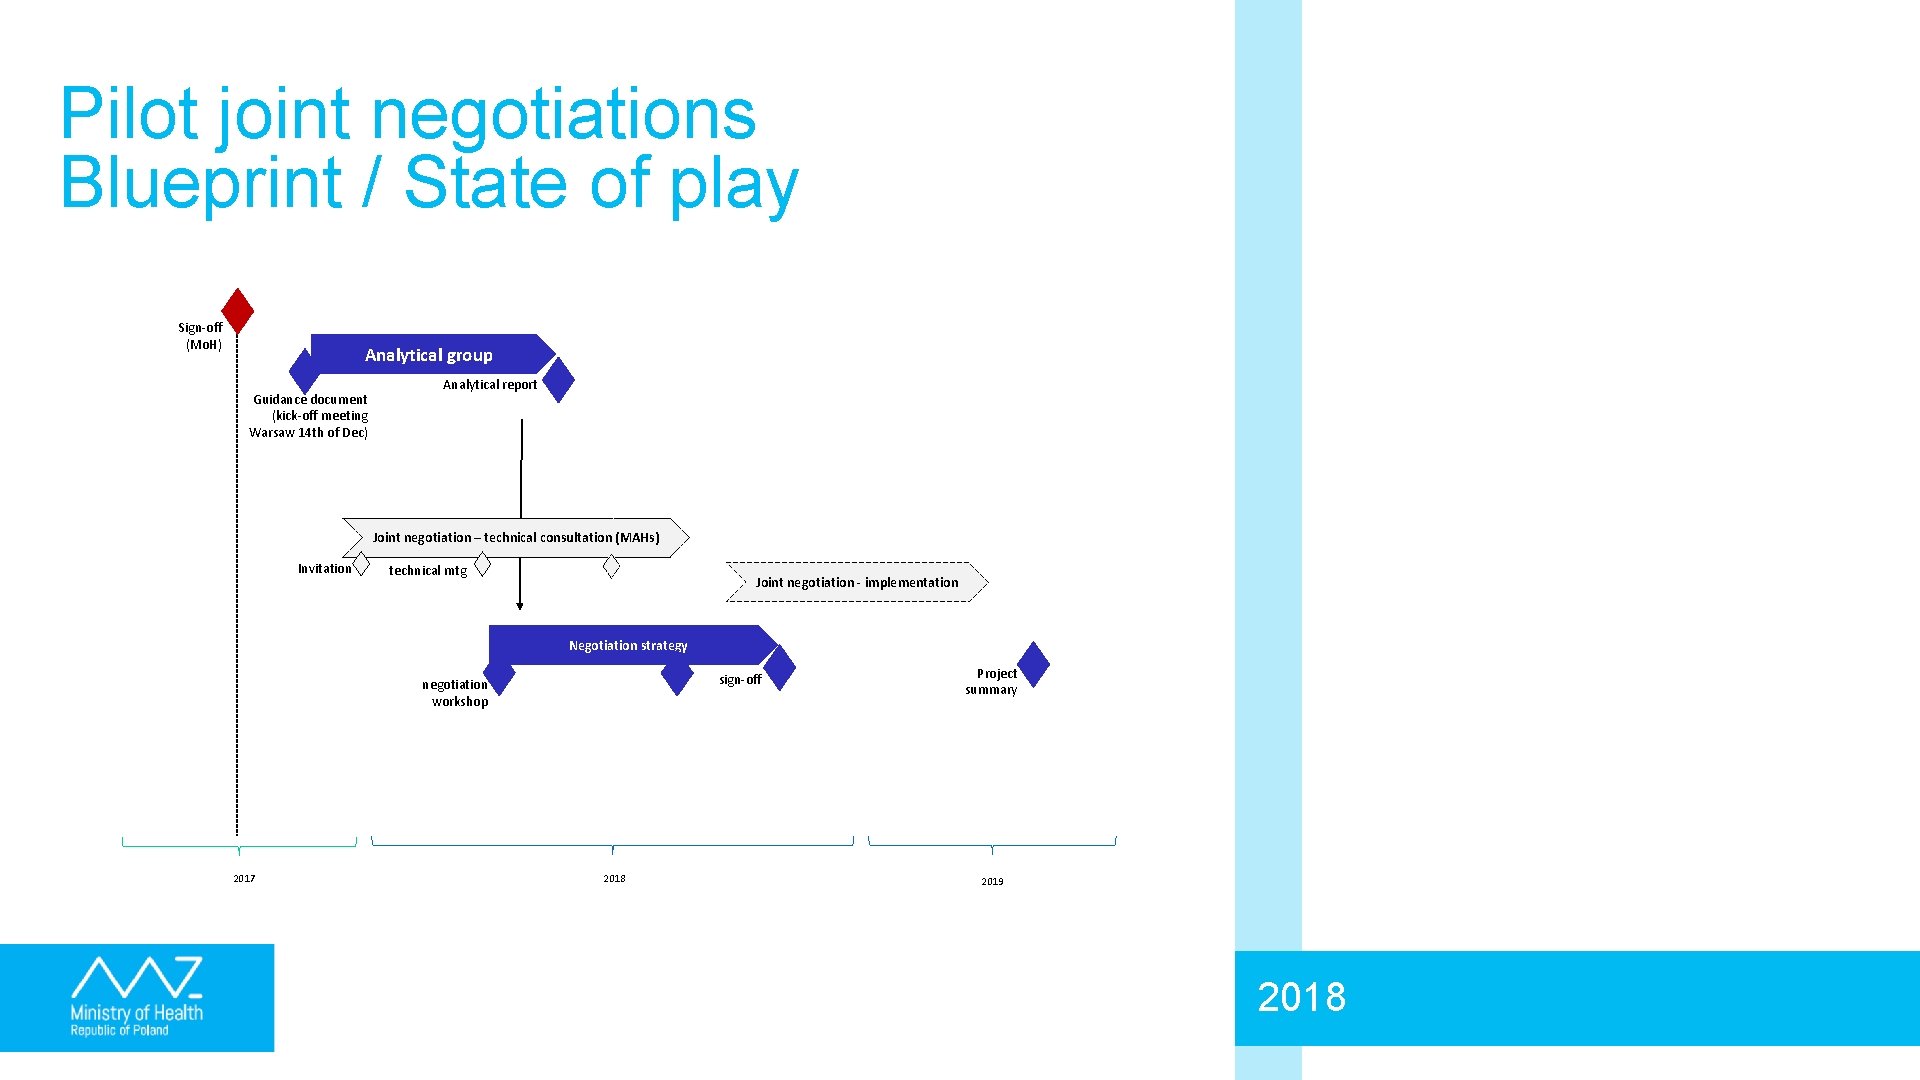 Pilot joint negotiations Blueprint / State of play Sign-off (Mo. H) Analytical group Guidance